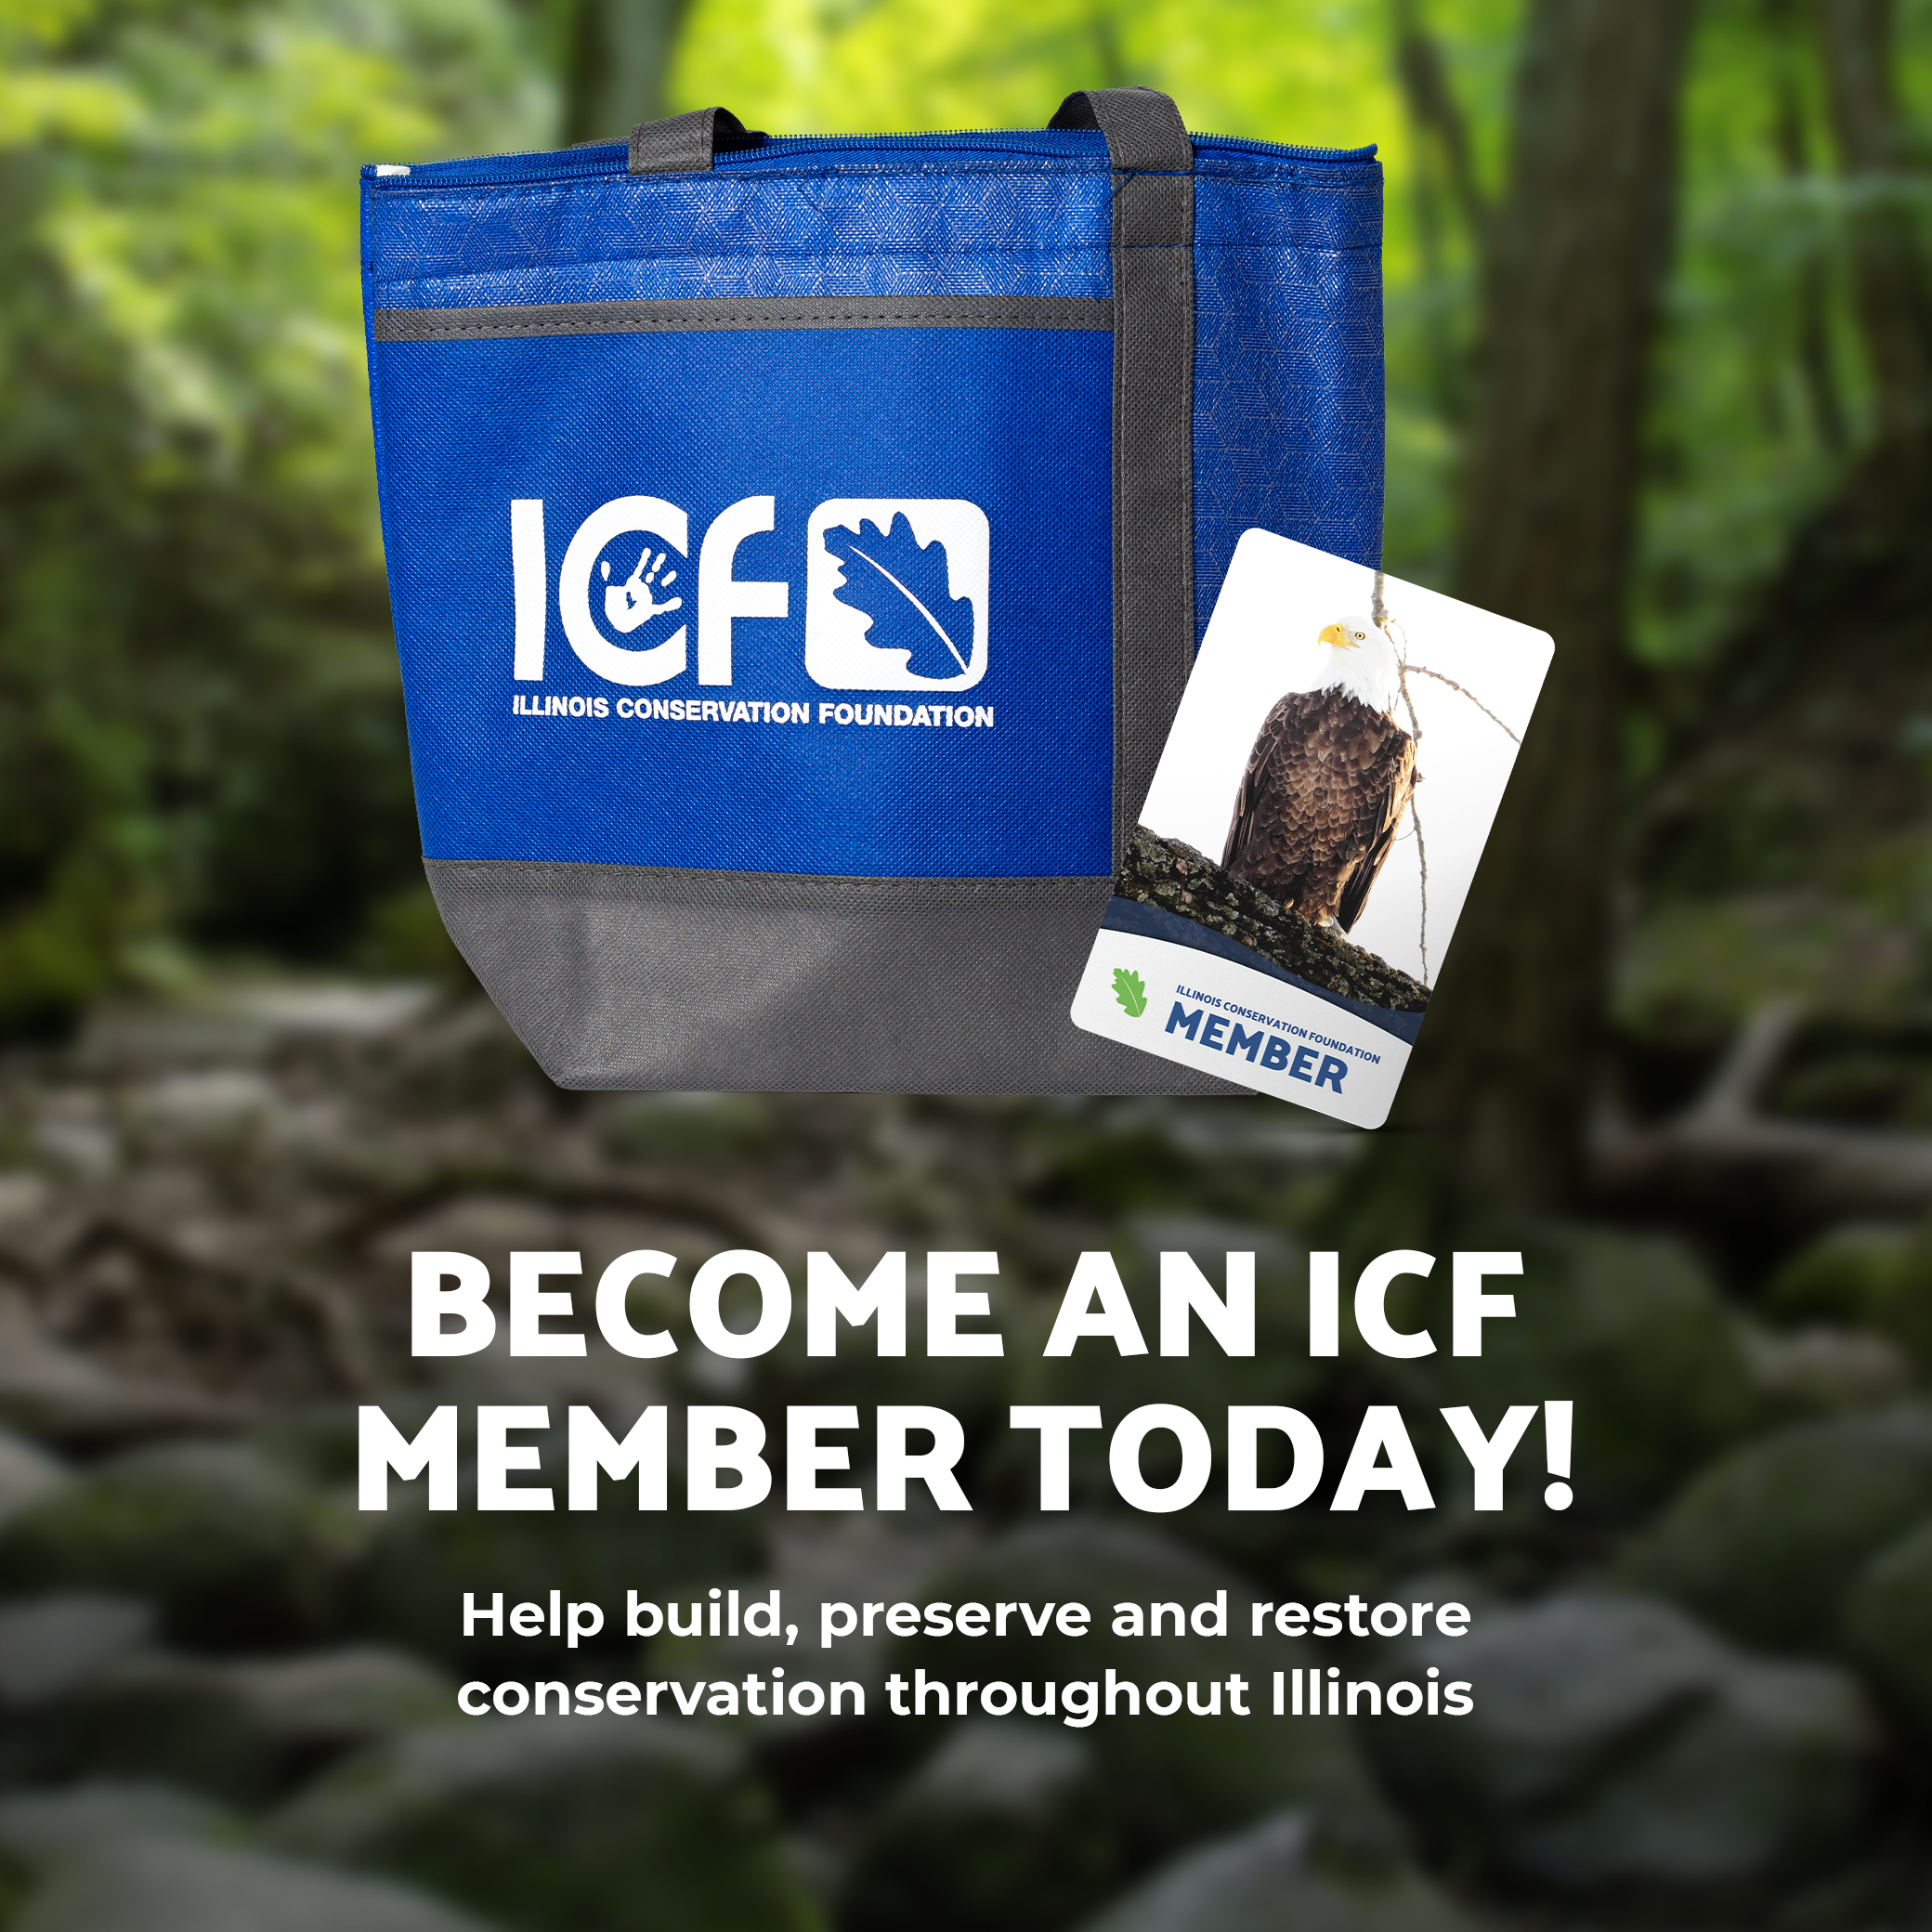 Become an ICF member today help build, preserve and restore conservation throughout Illinois